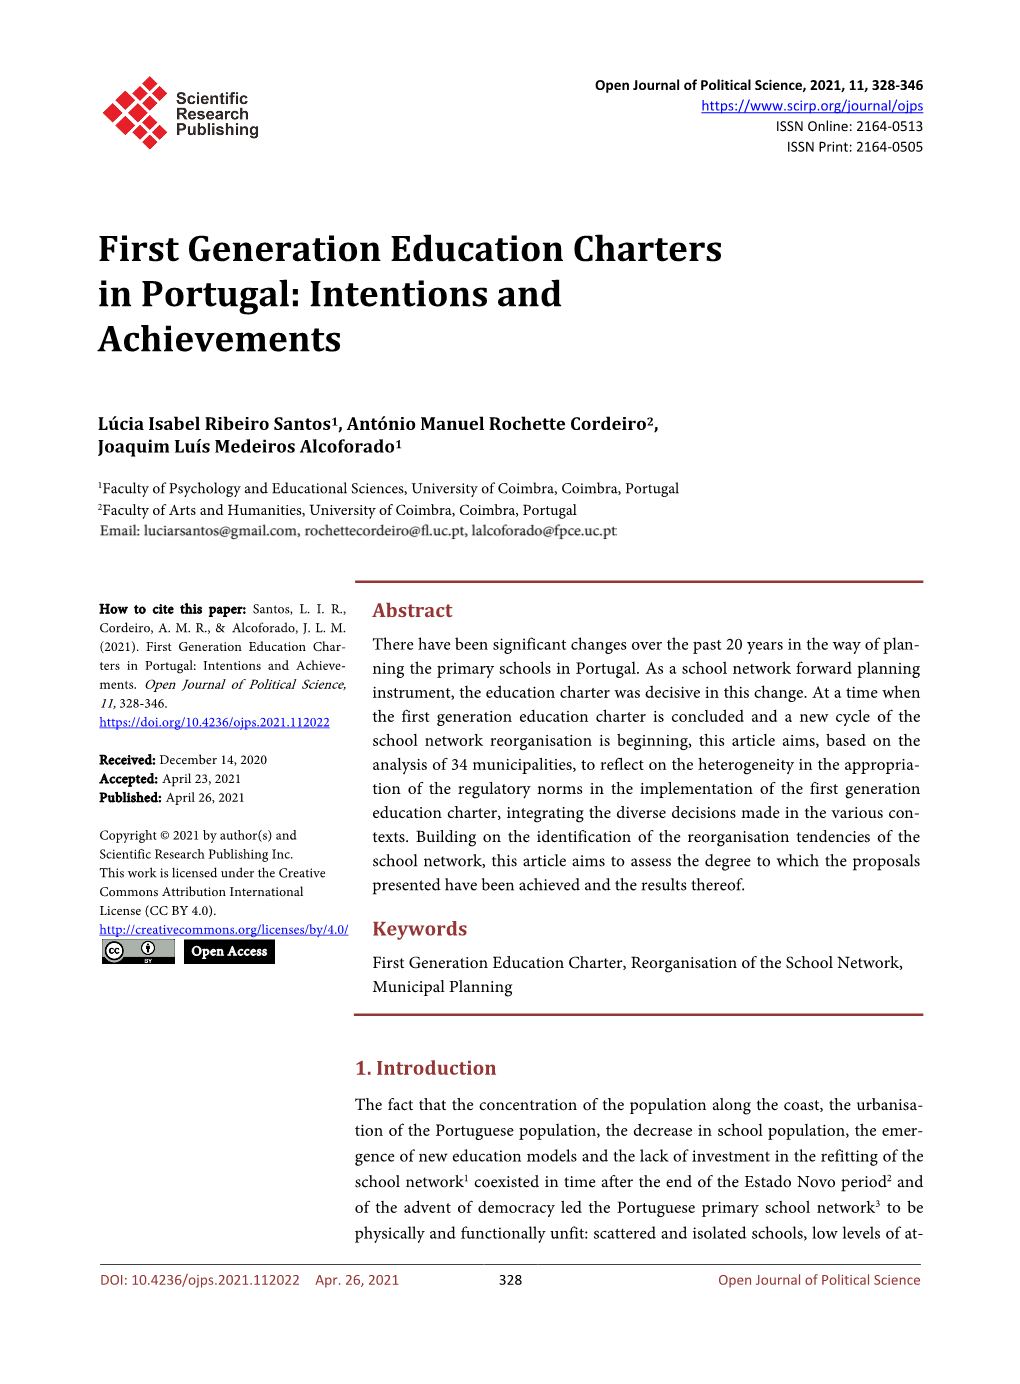 First Generation Education Charters in Portugal: Intentions and Achievements